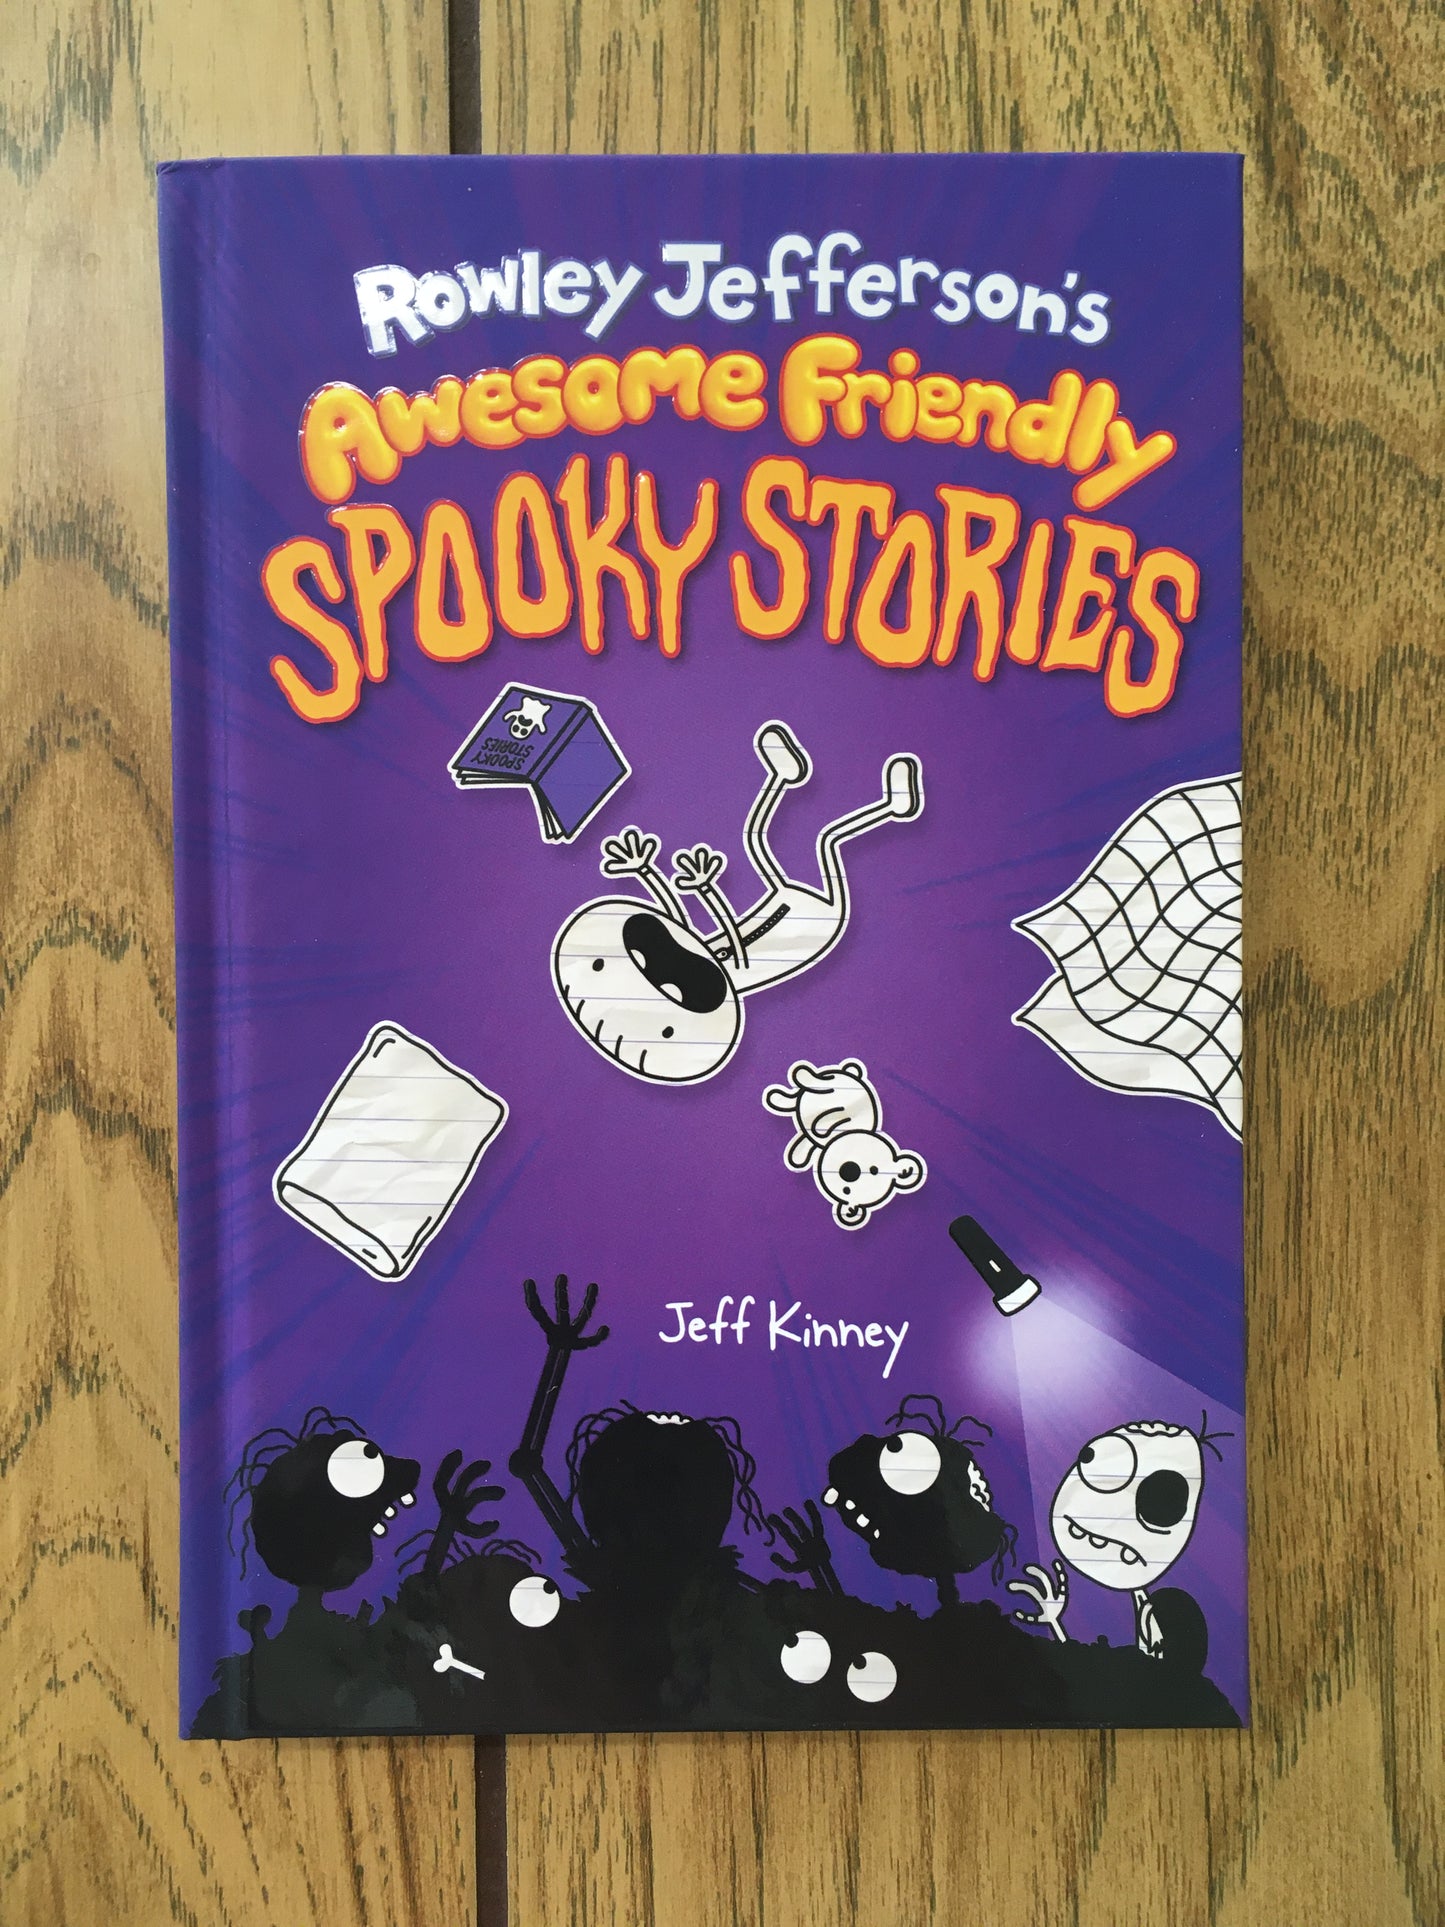 Rowley Jefferson's Awesome Friendly Spooky Stories (Awesome Friendly #3)